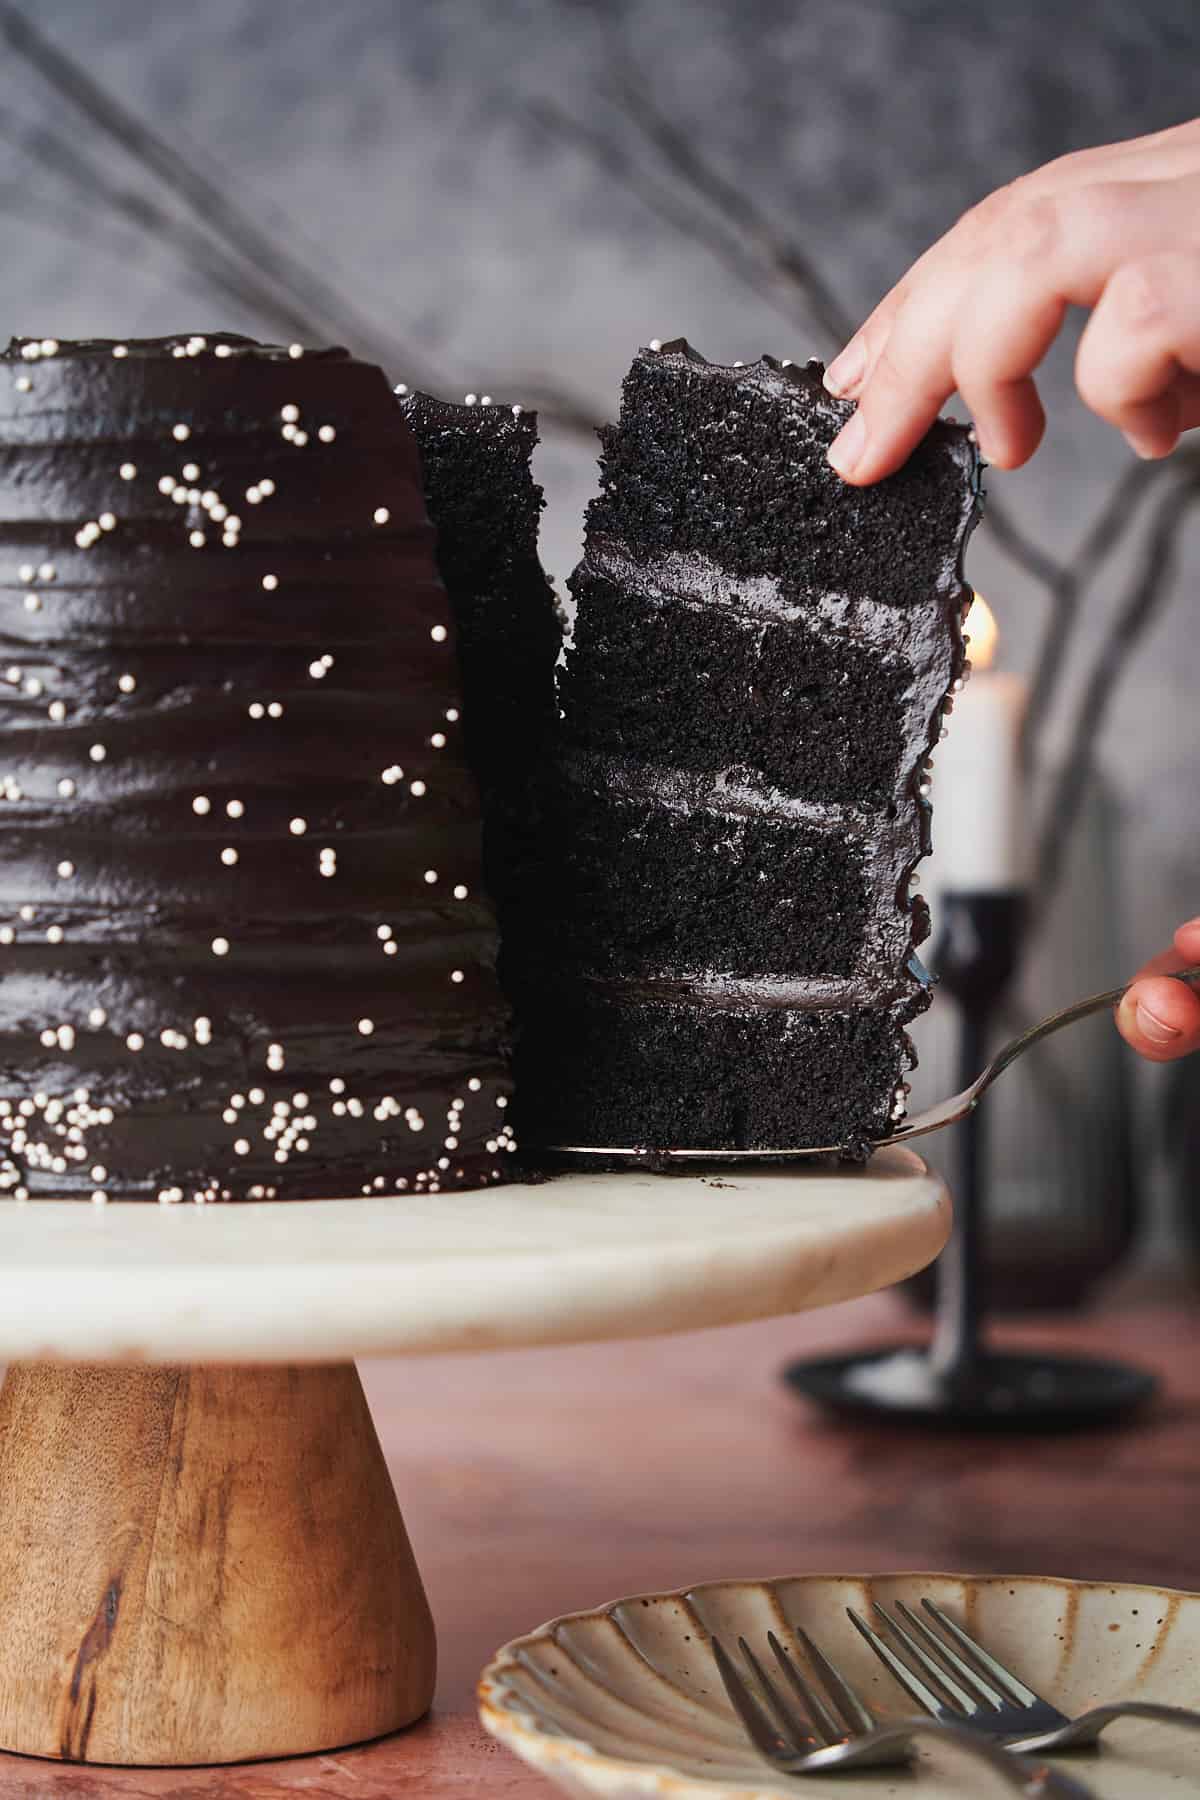 Hand pulling a 4-layer slice of black velvet cake from the cake with a candlestick burning in the background. 